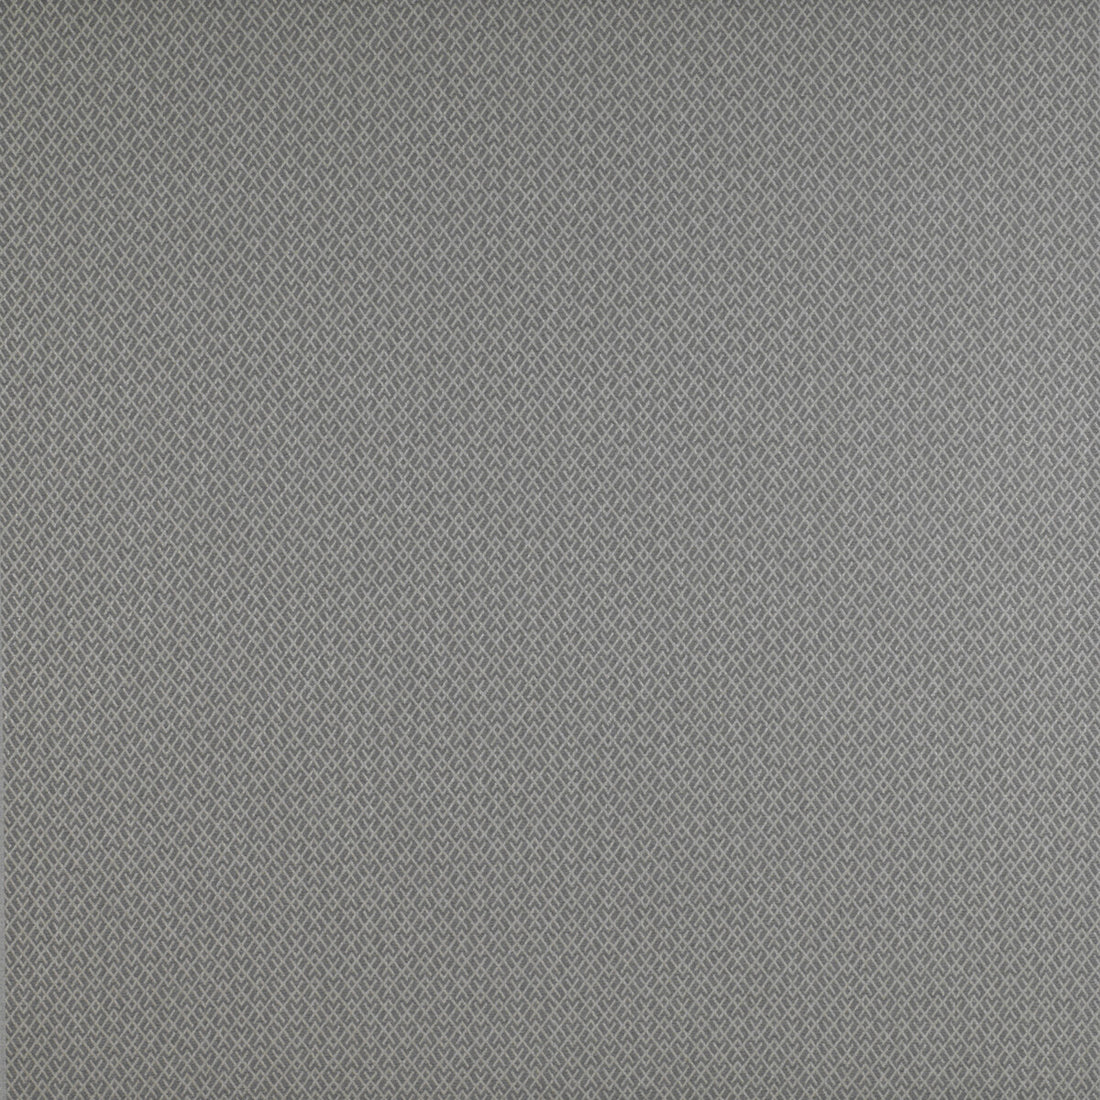 Chueca fabric in gris color - pattern GDT5205.003.0 - by Gaston y Daniela in the Madrid collection